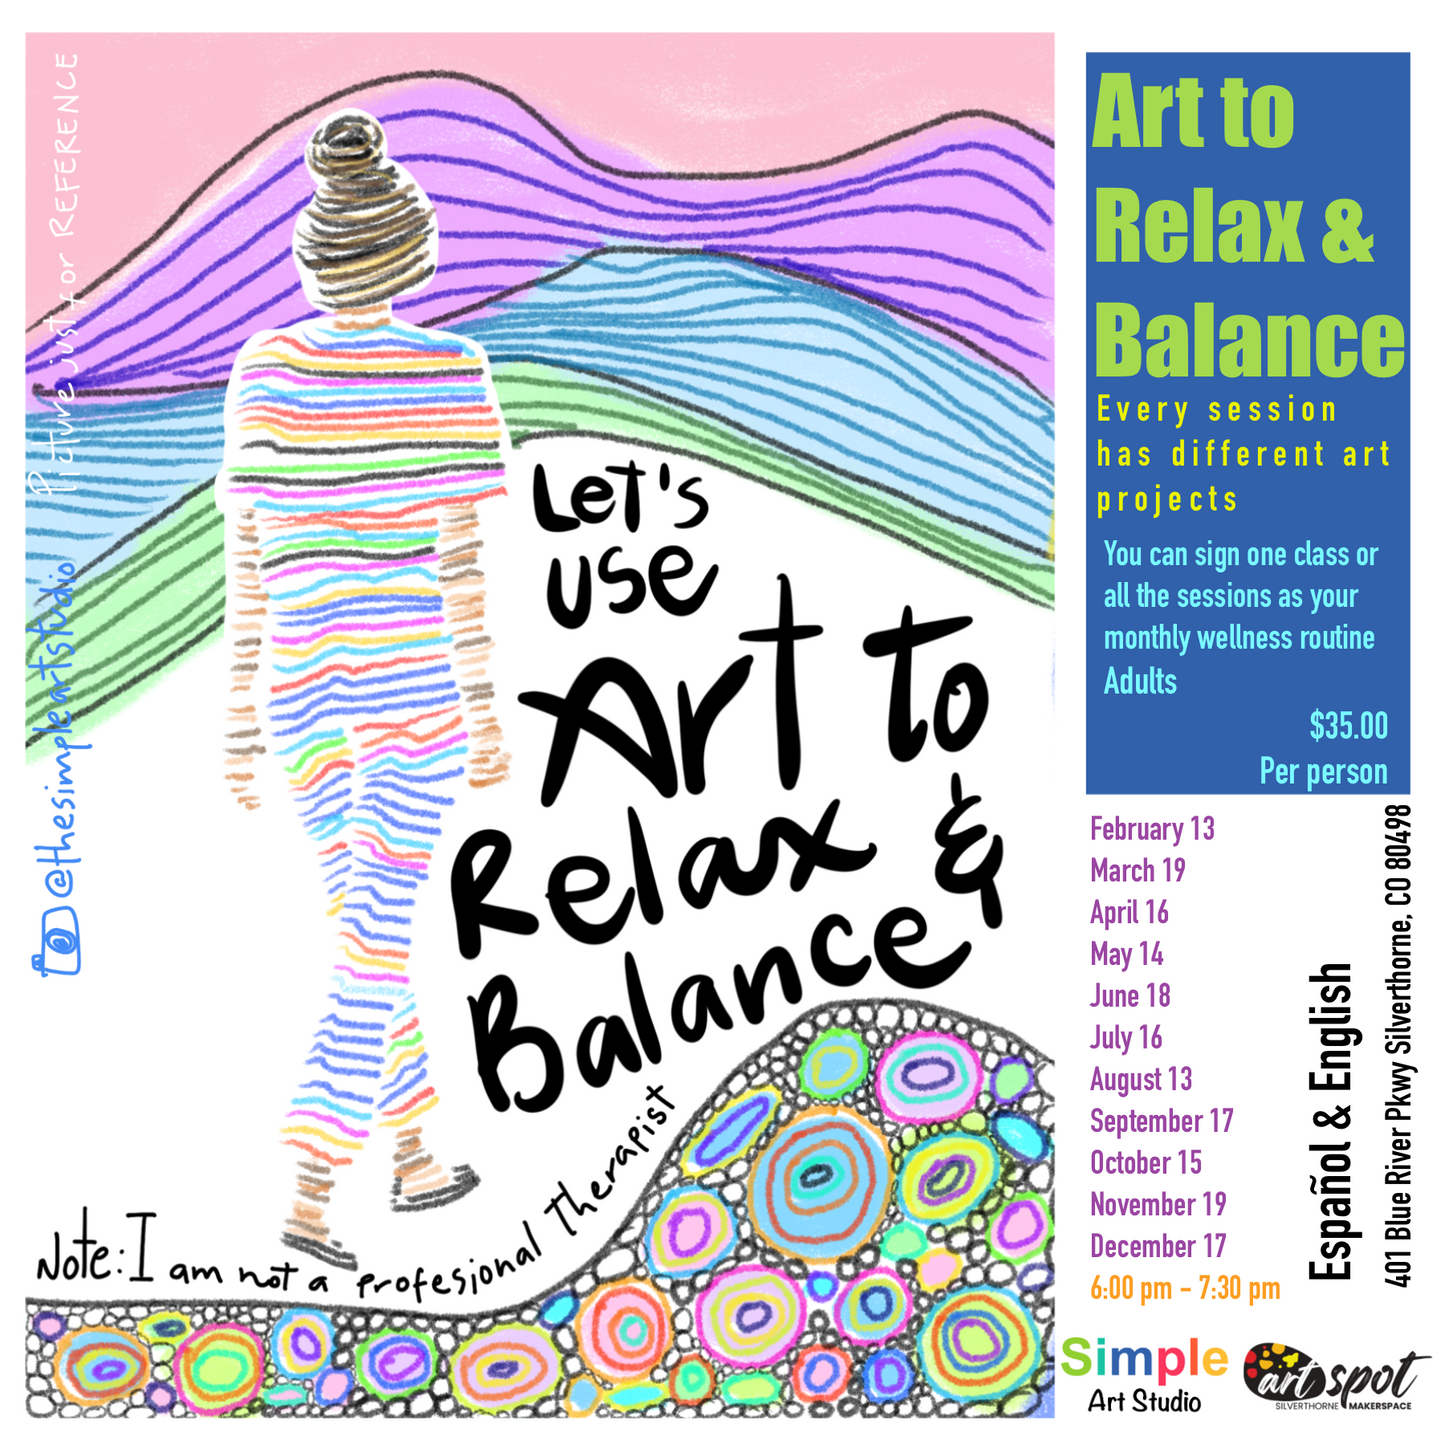 Art to Relax and Balance